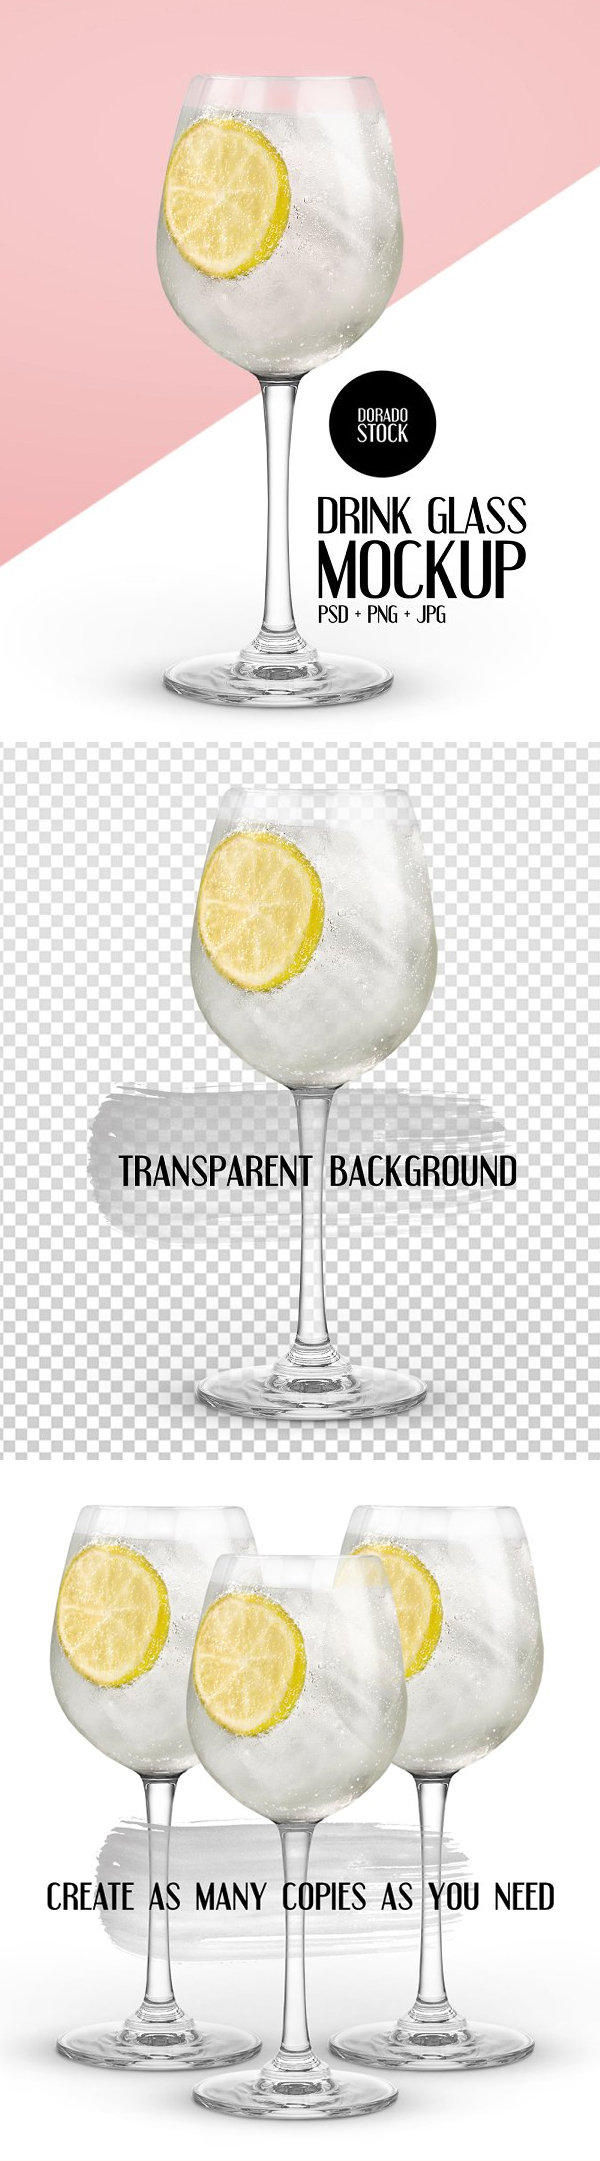 Isolated Drink Glass Mockup